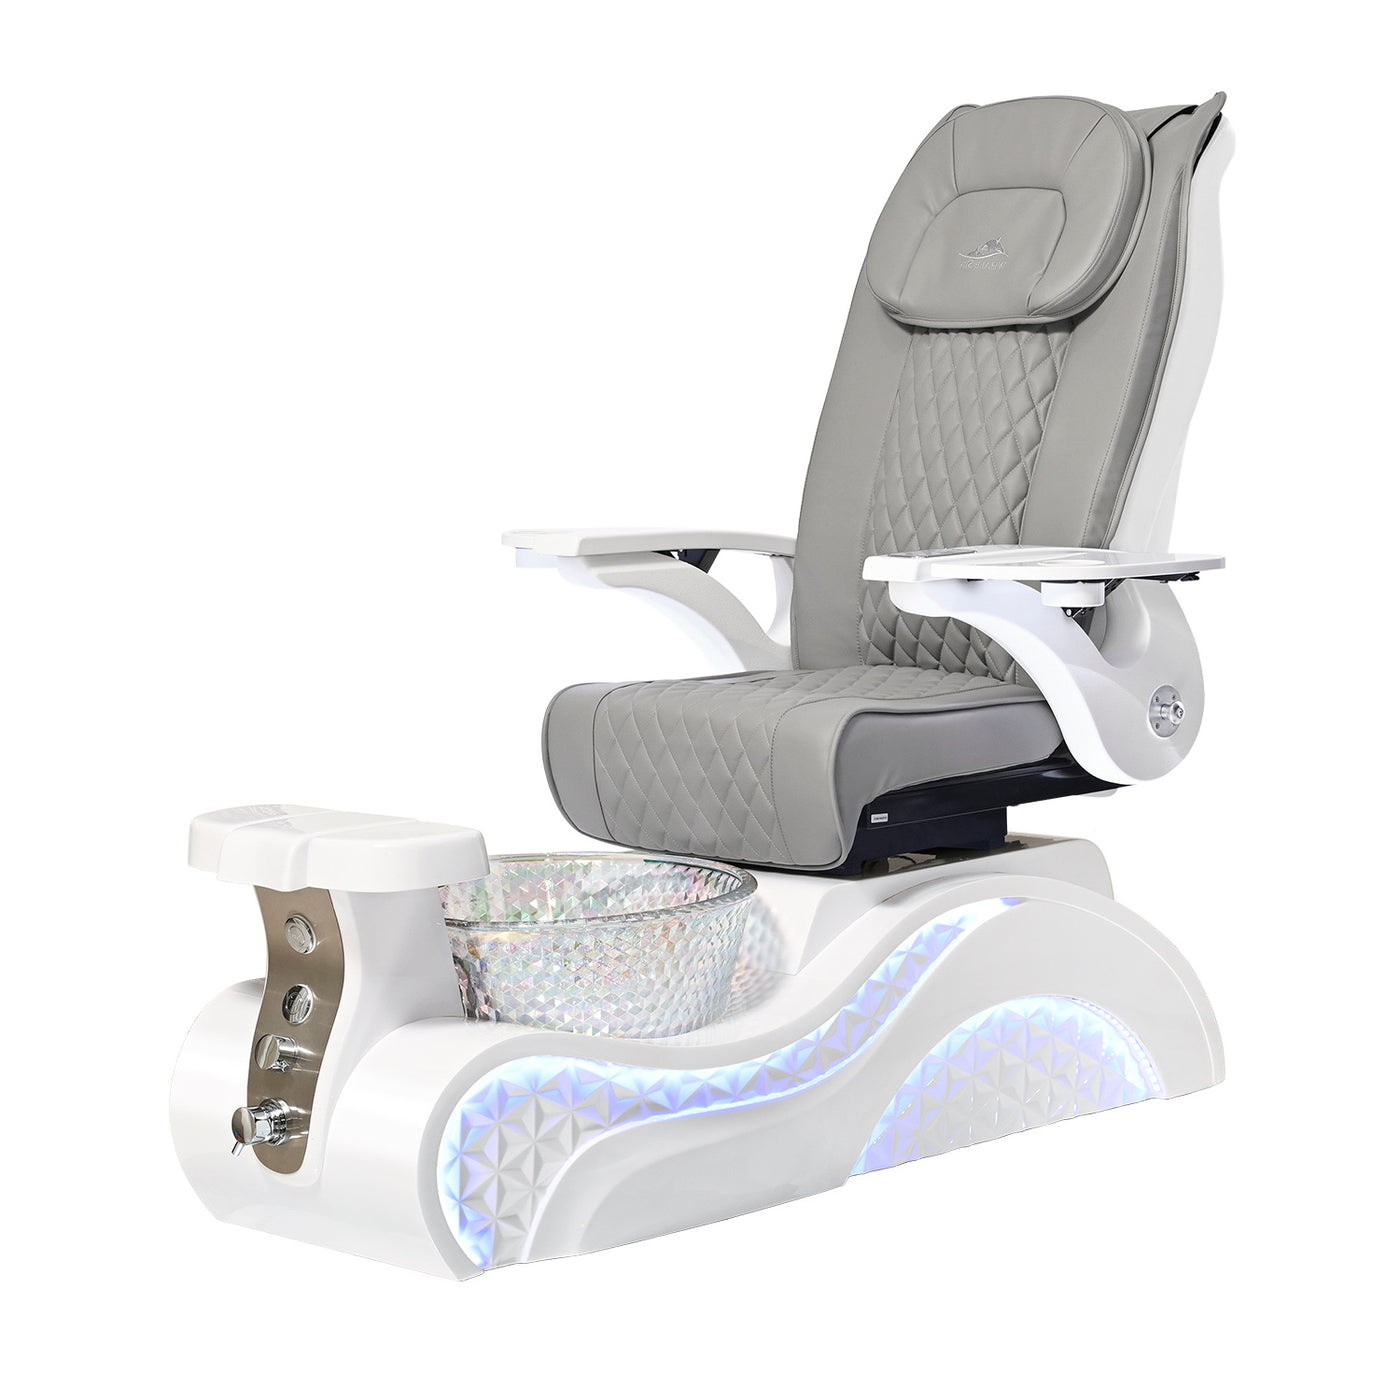 Lucent II Pedicure Chair. Gray Seat, White Armrest, White Base & Crystal Glass Bowl 